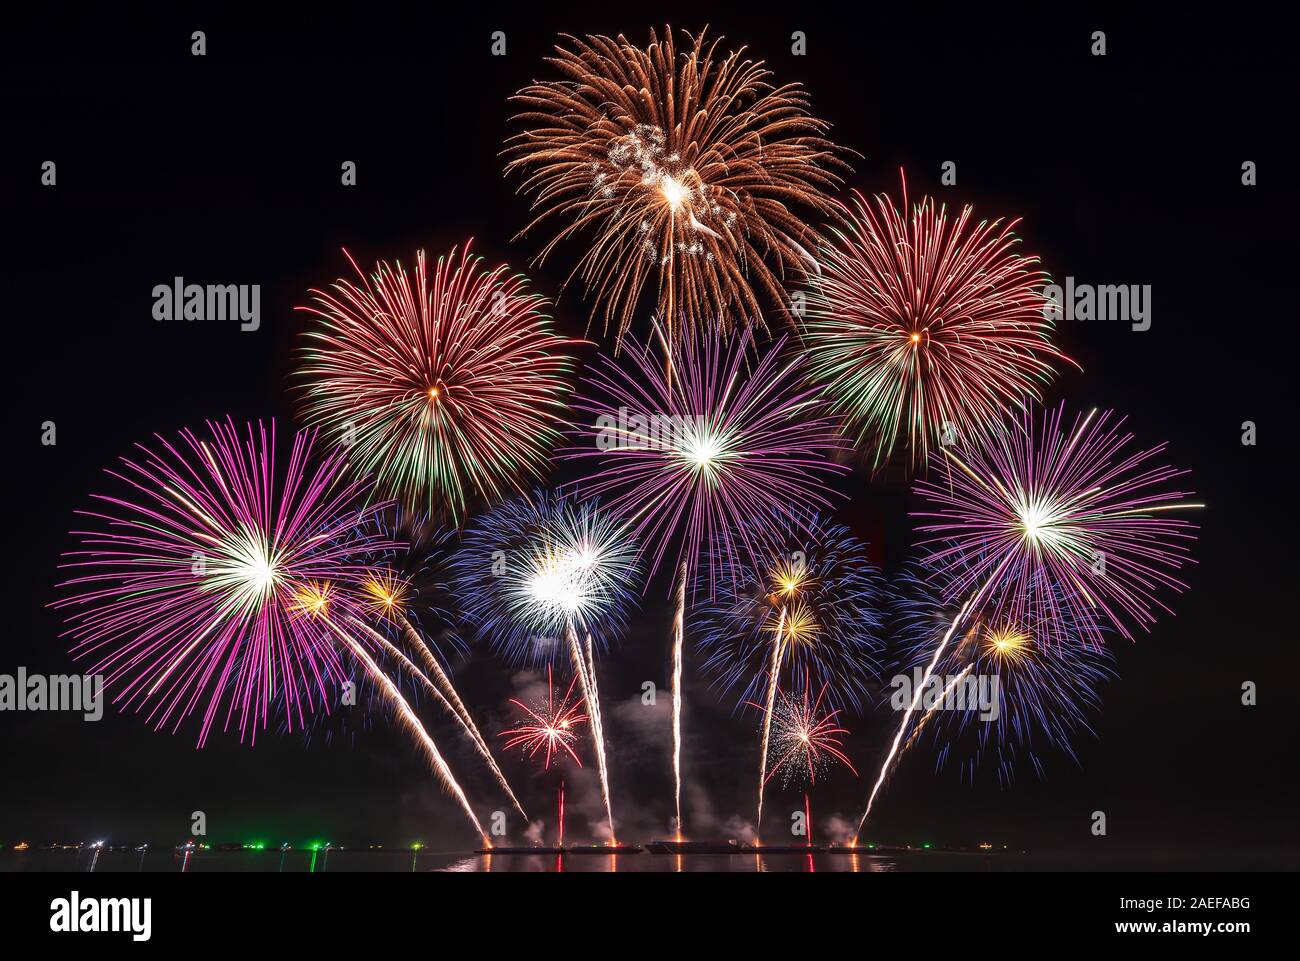 real fireworks festival in the sky for celebration at night over the sea at coast side for new year countdown celebration background Stock Photo